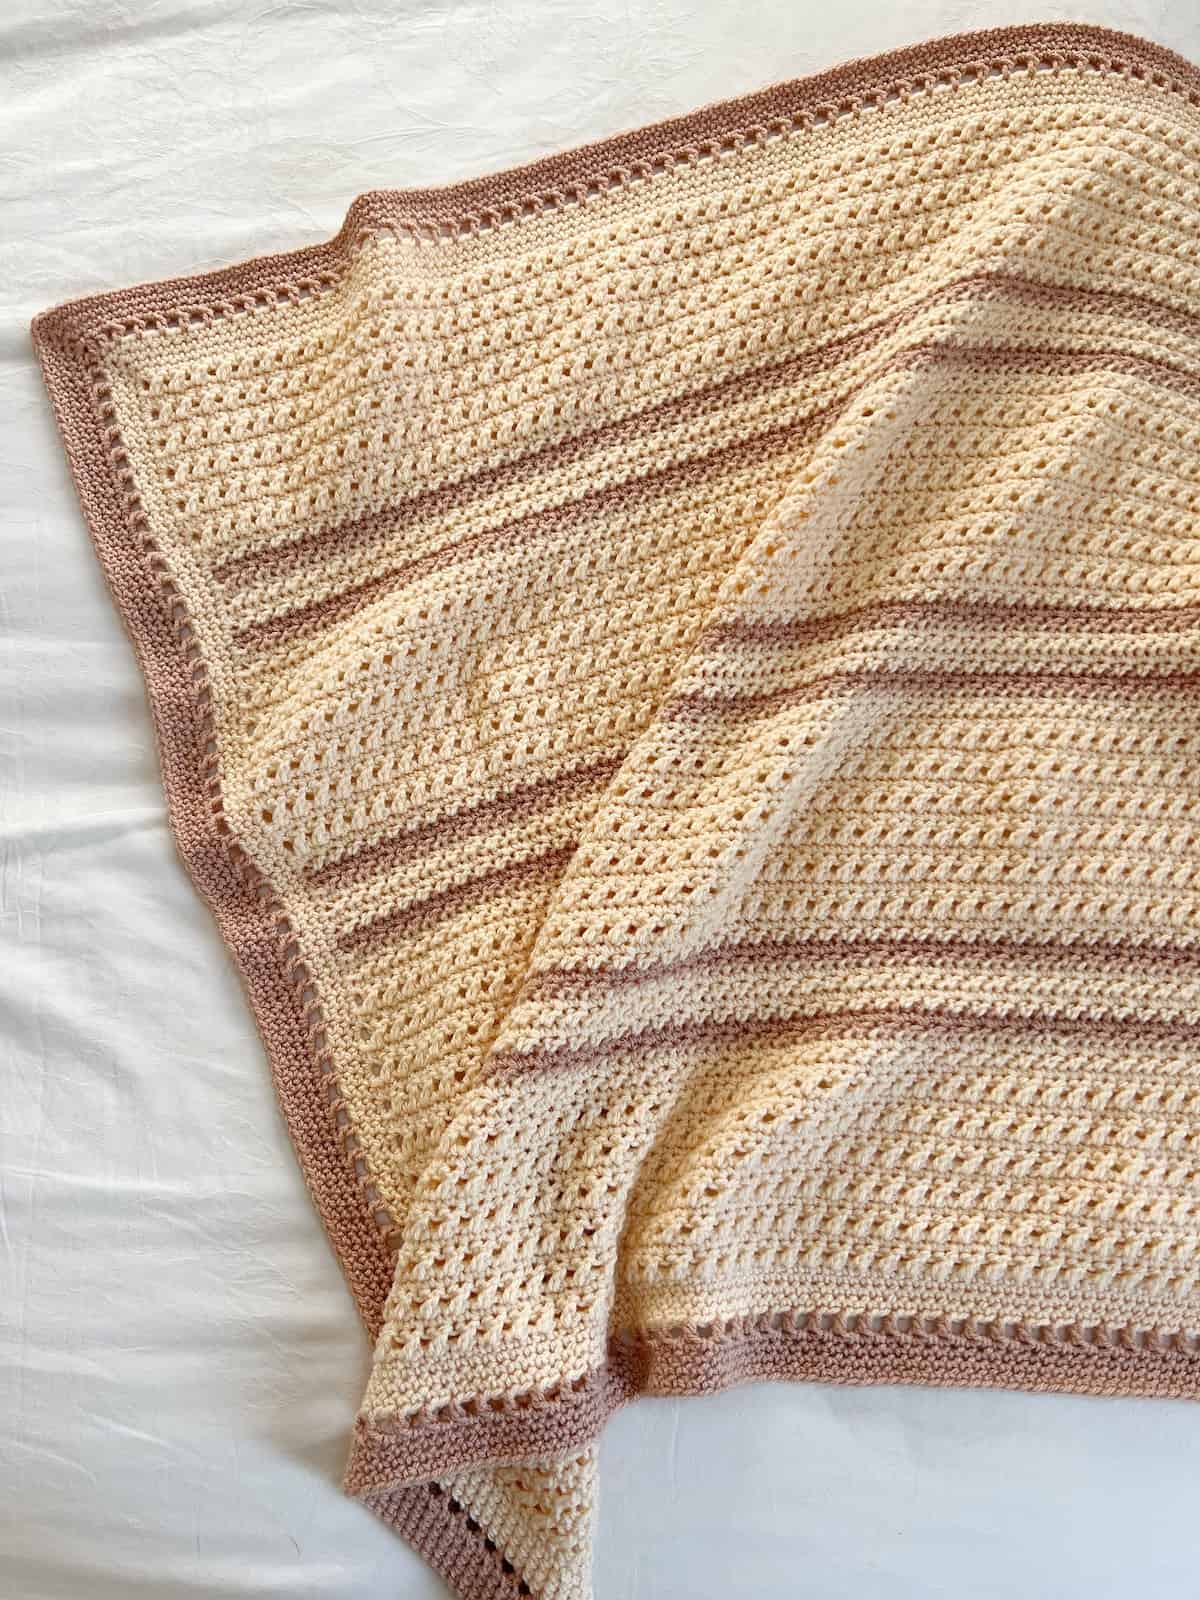 Traditional crochet baby blanket in cream and fawn.